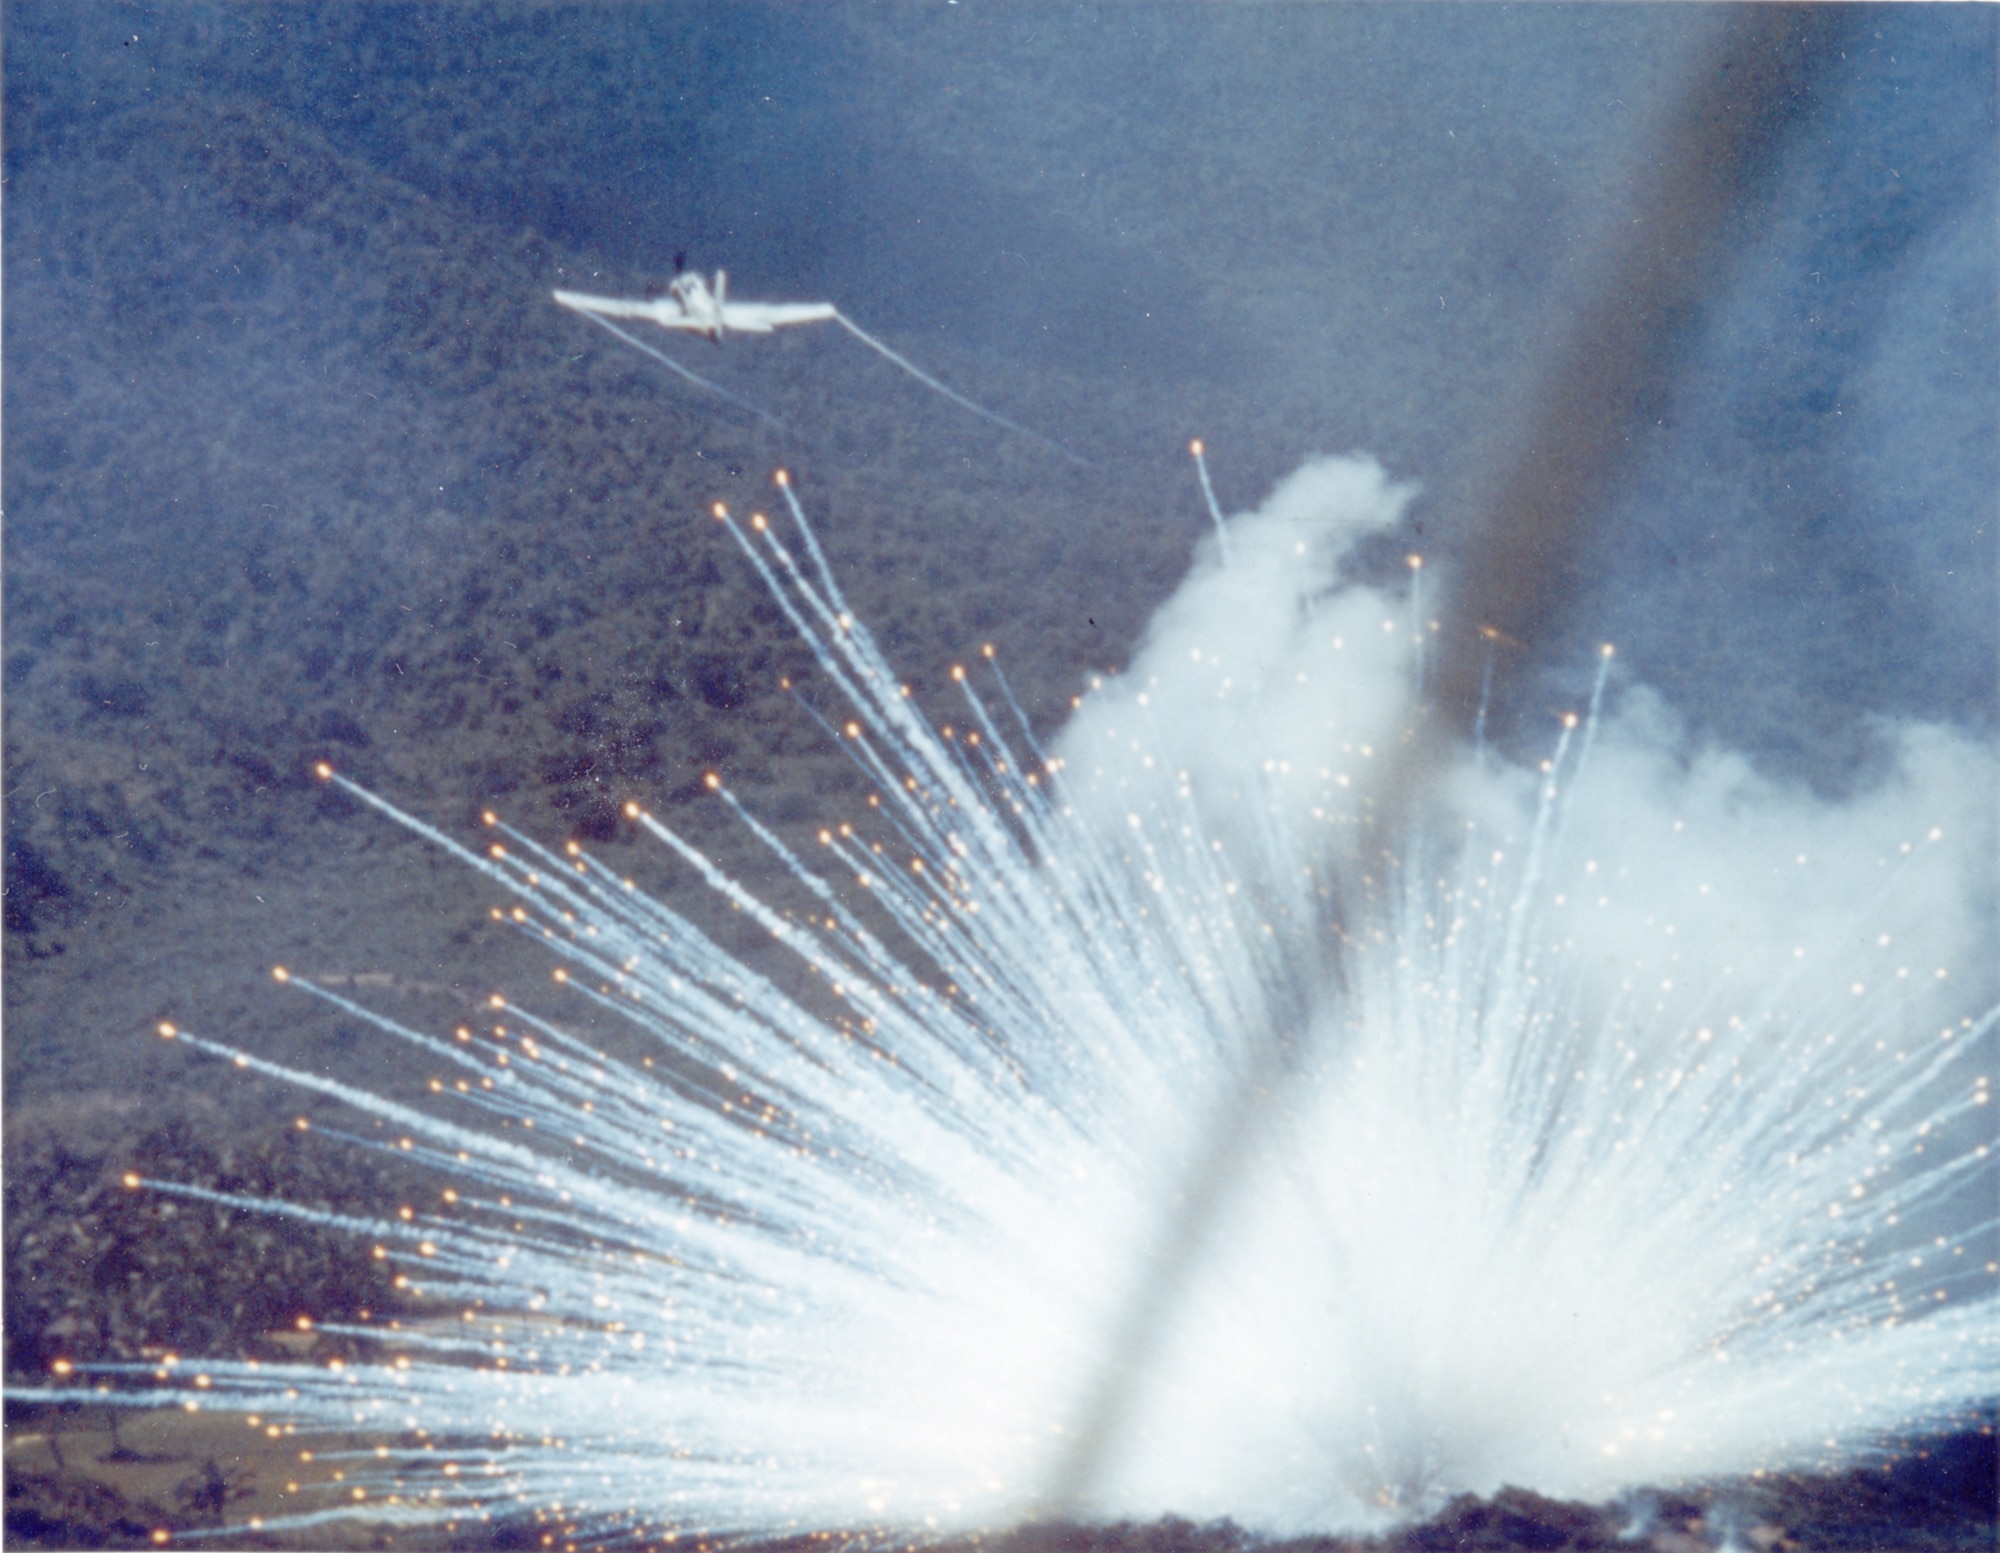 U.S. Air Force aircraft drops a white phosphorus bomb on a Viet Cong postion in 1966. (U.S. Air Force image).